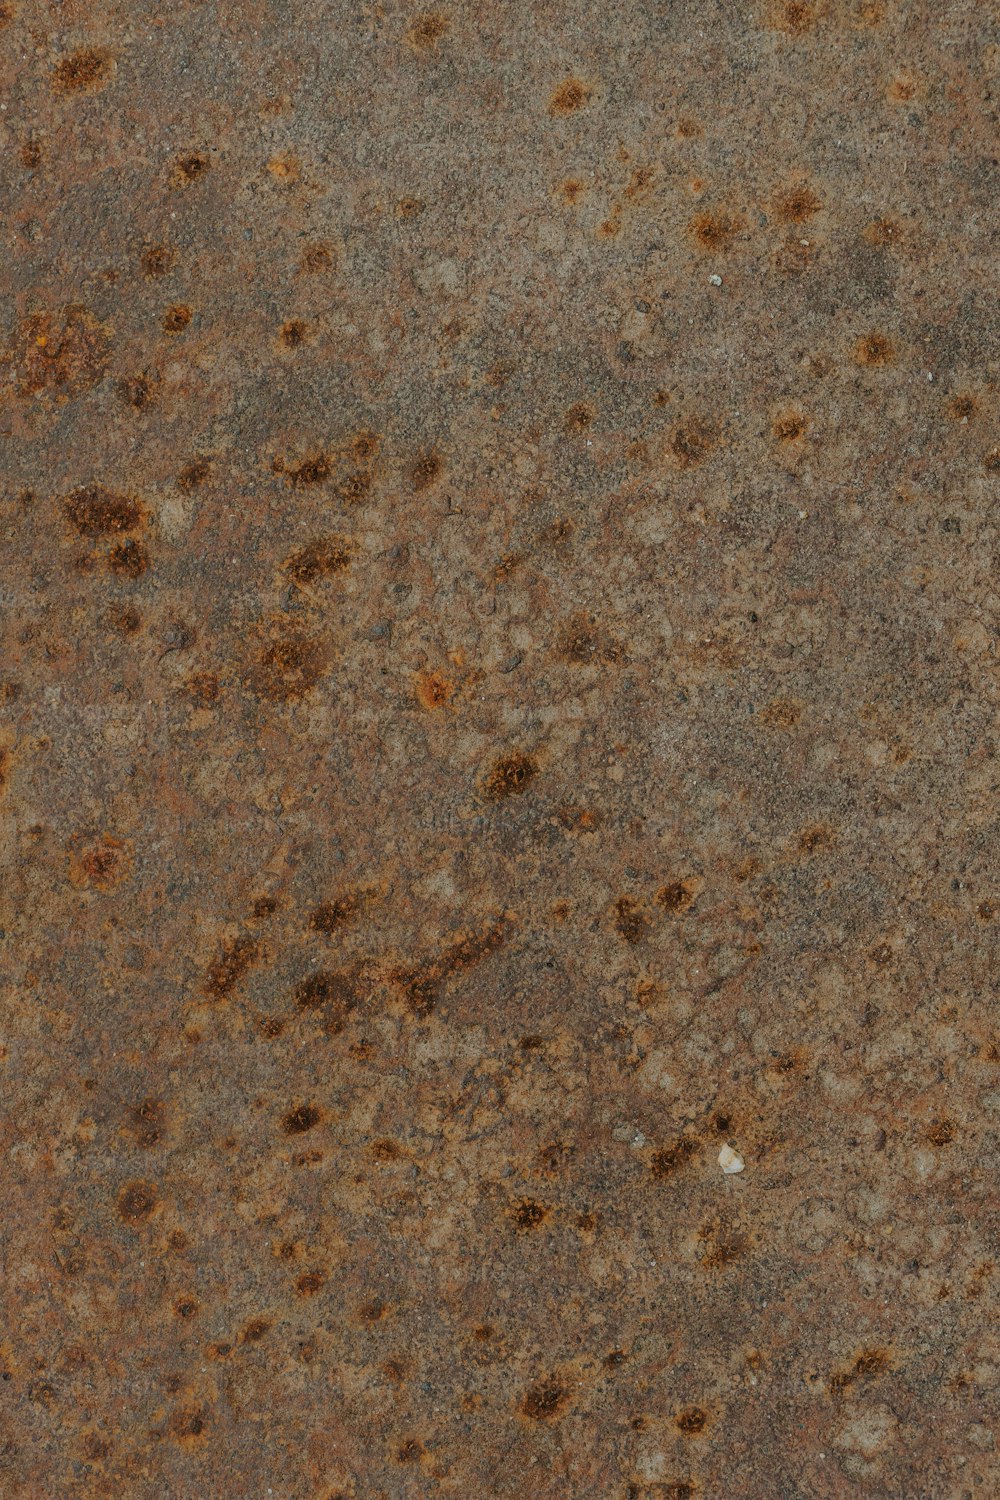 a close up of a metal surface with brown spots